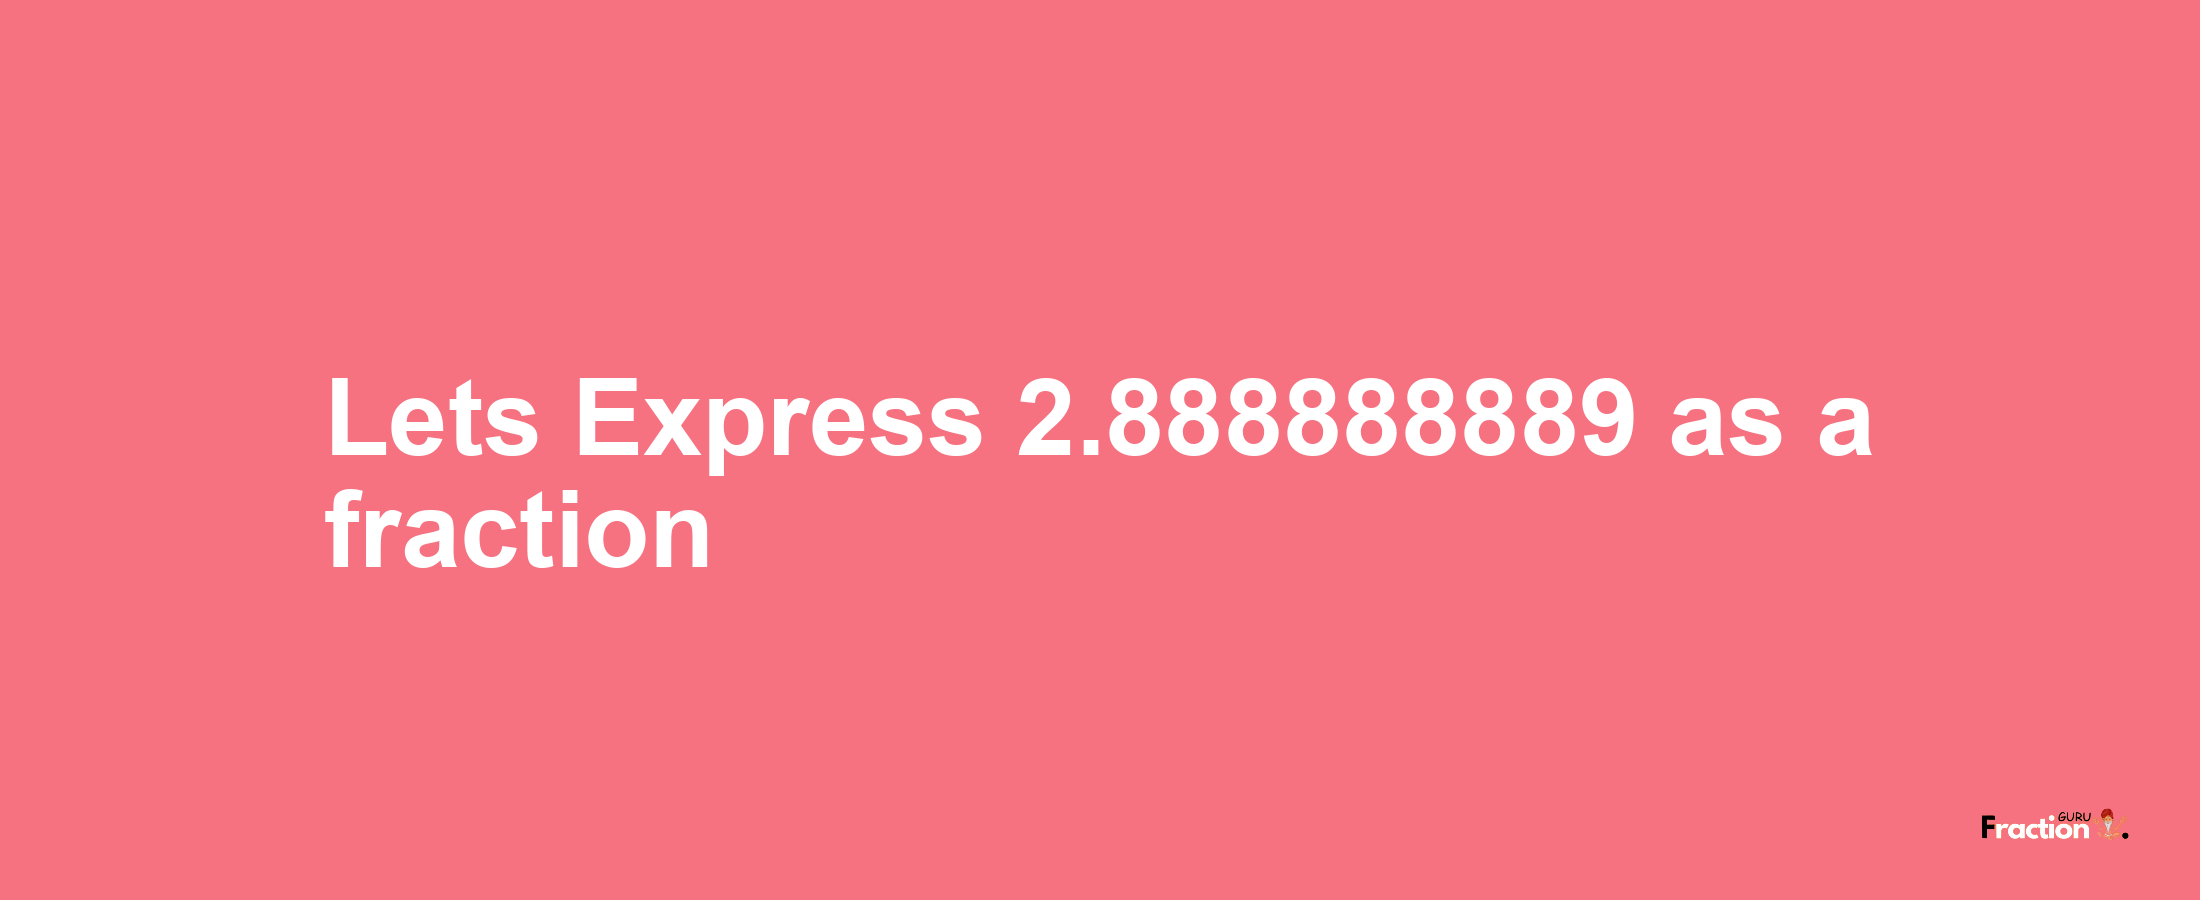 Lets Express 2.888888889 as afraction